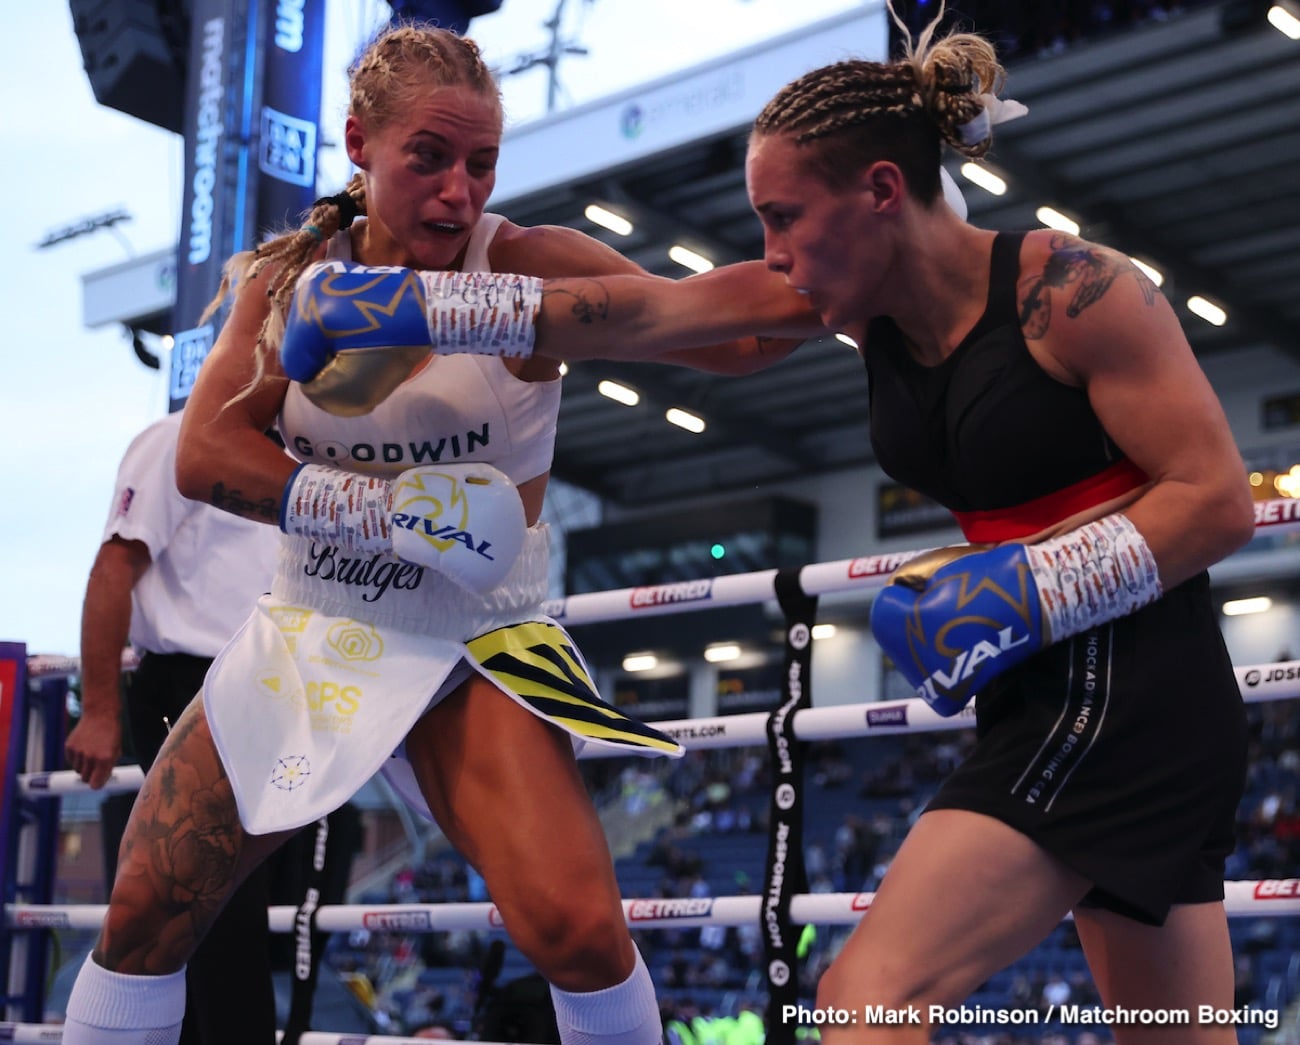 Image: Boxing Results: Lara - Warrington Rematch Ends in TD, Katie Taylor Wins!